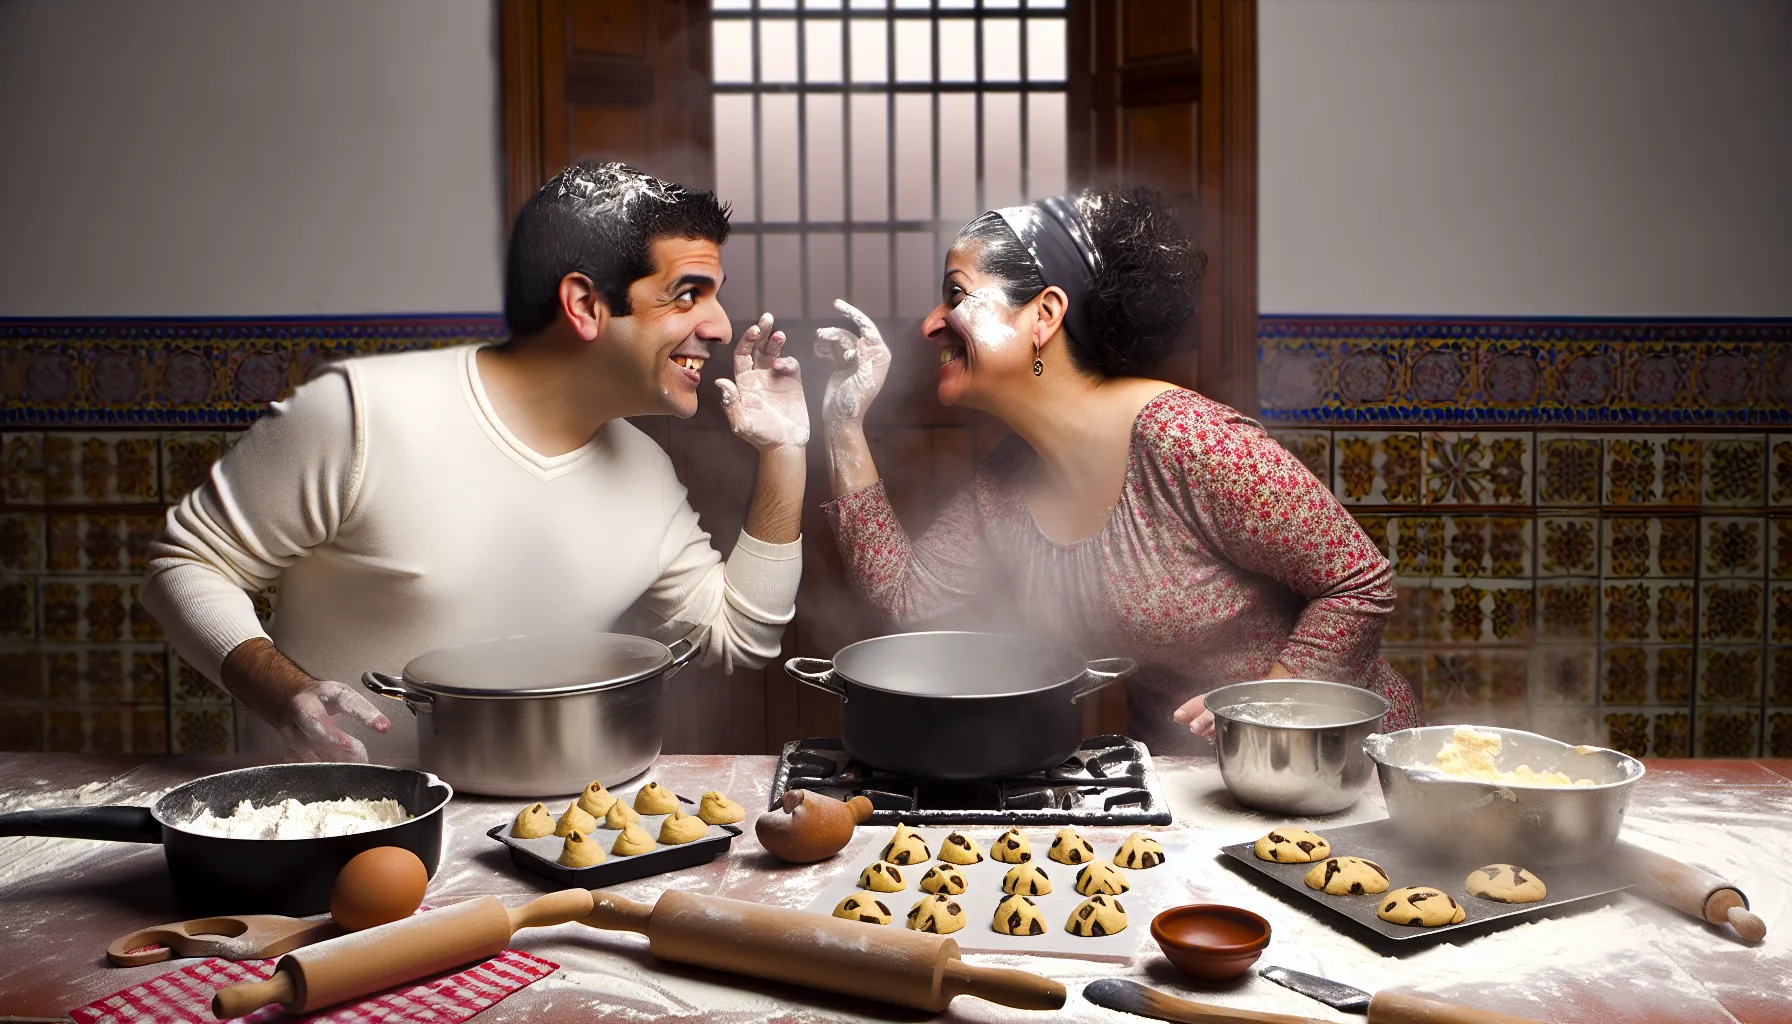 A couple baking together, embodying festive fun and togetherness